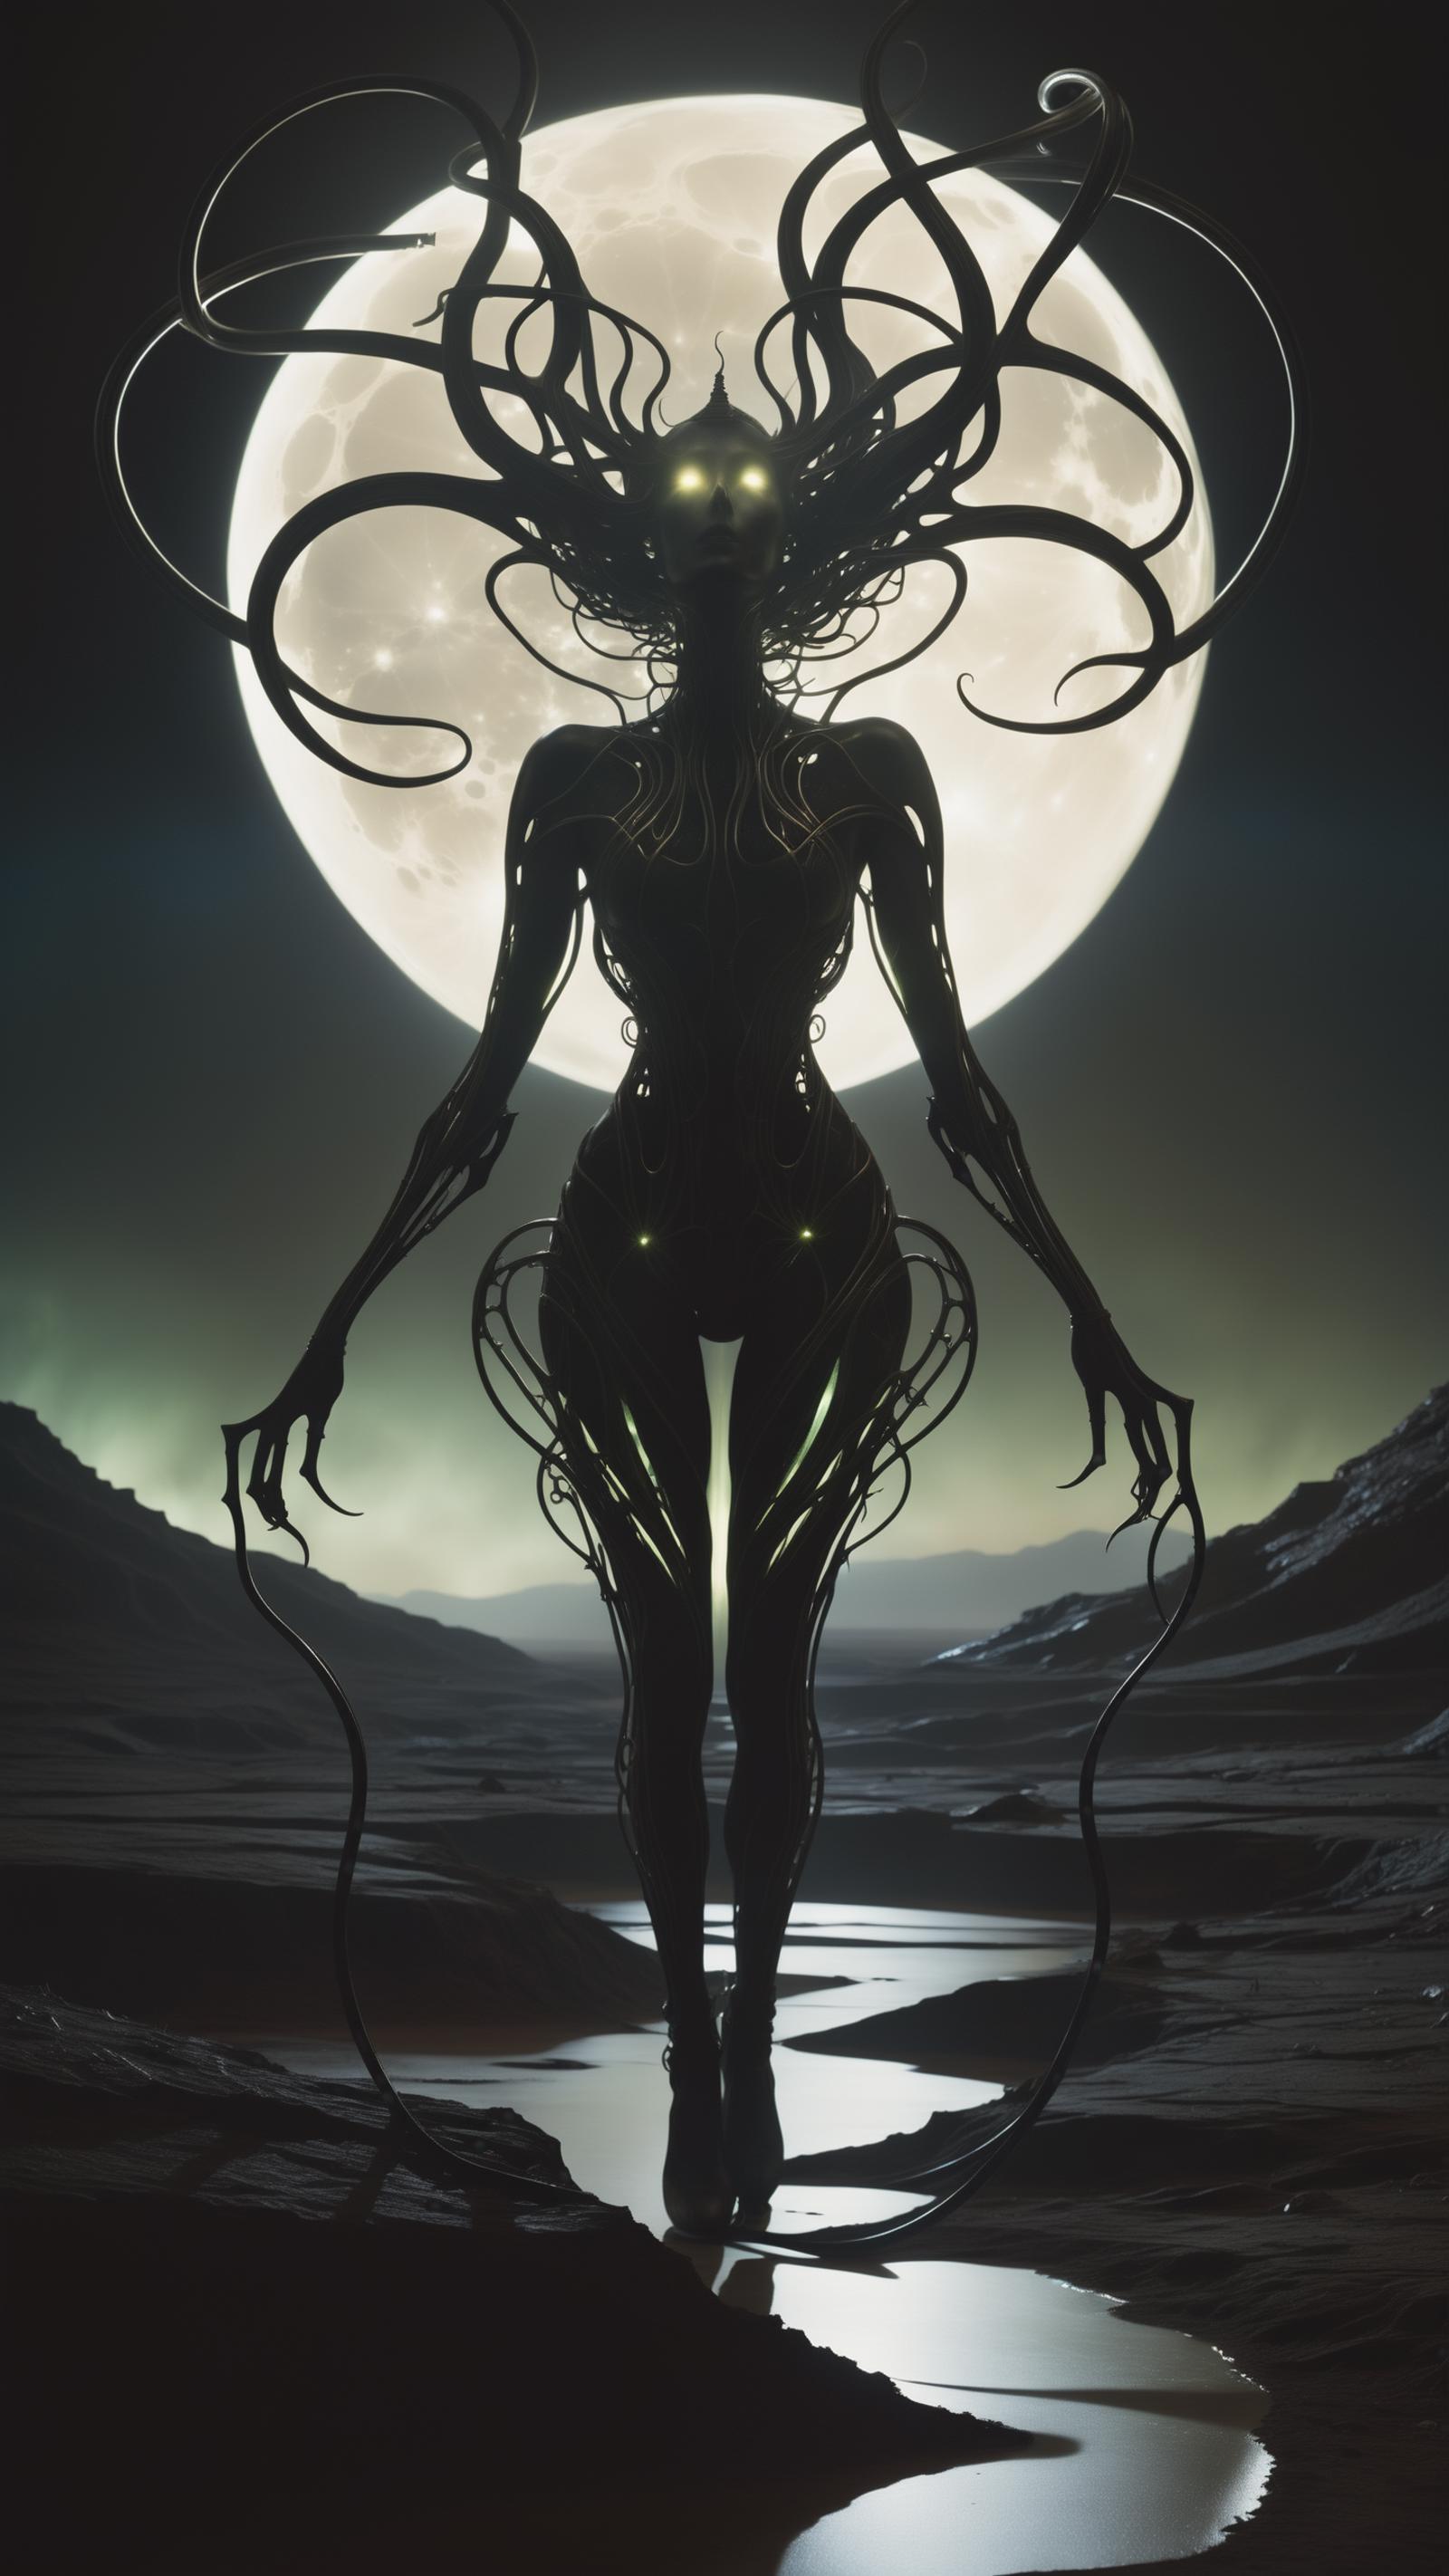 "Robotic Woman with Long Hair and Tentacles Standing in Front of a Moon"